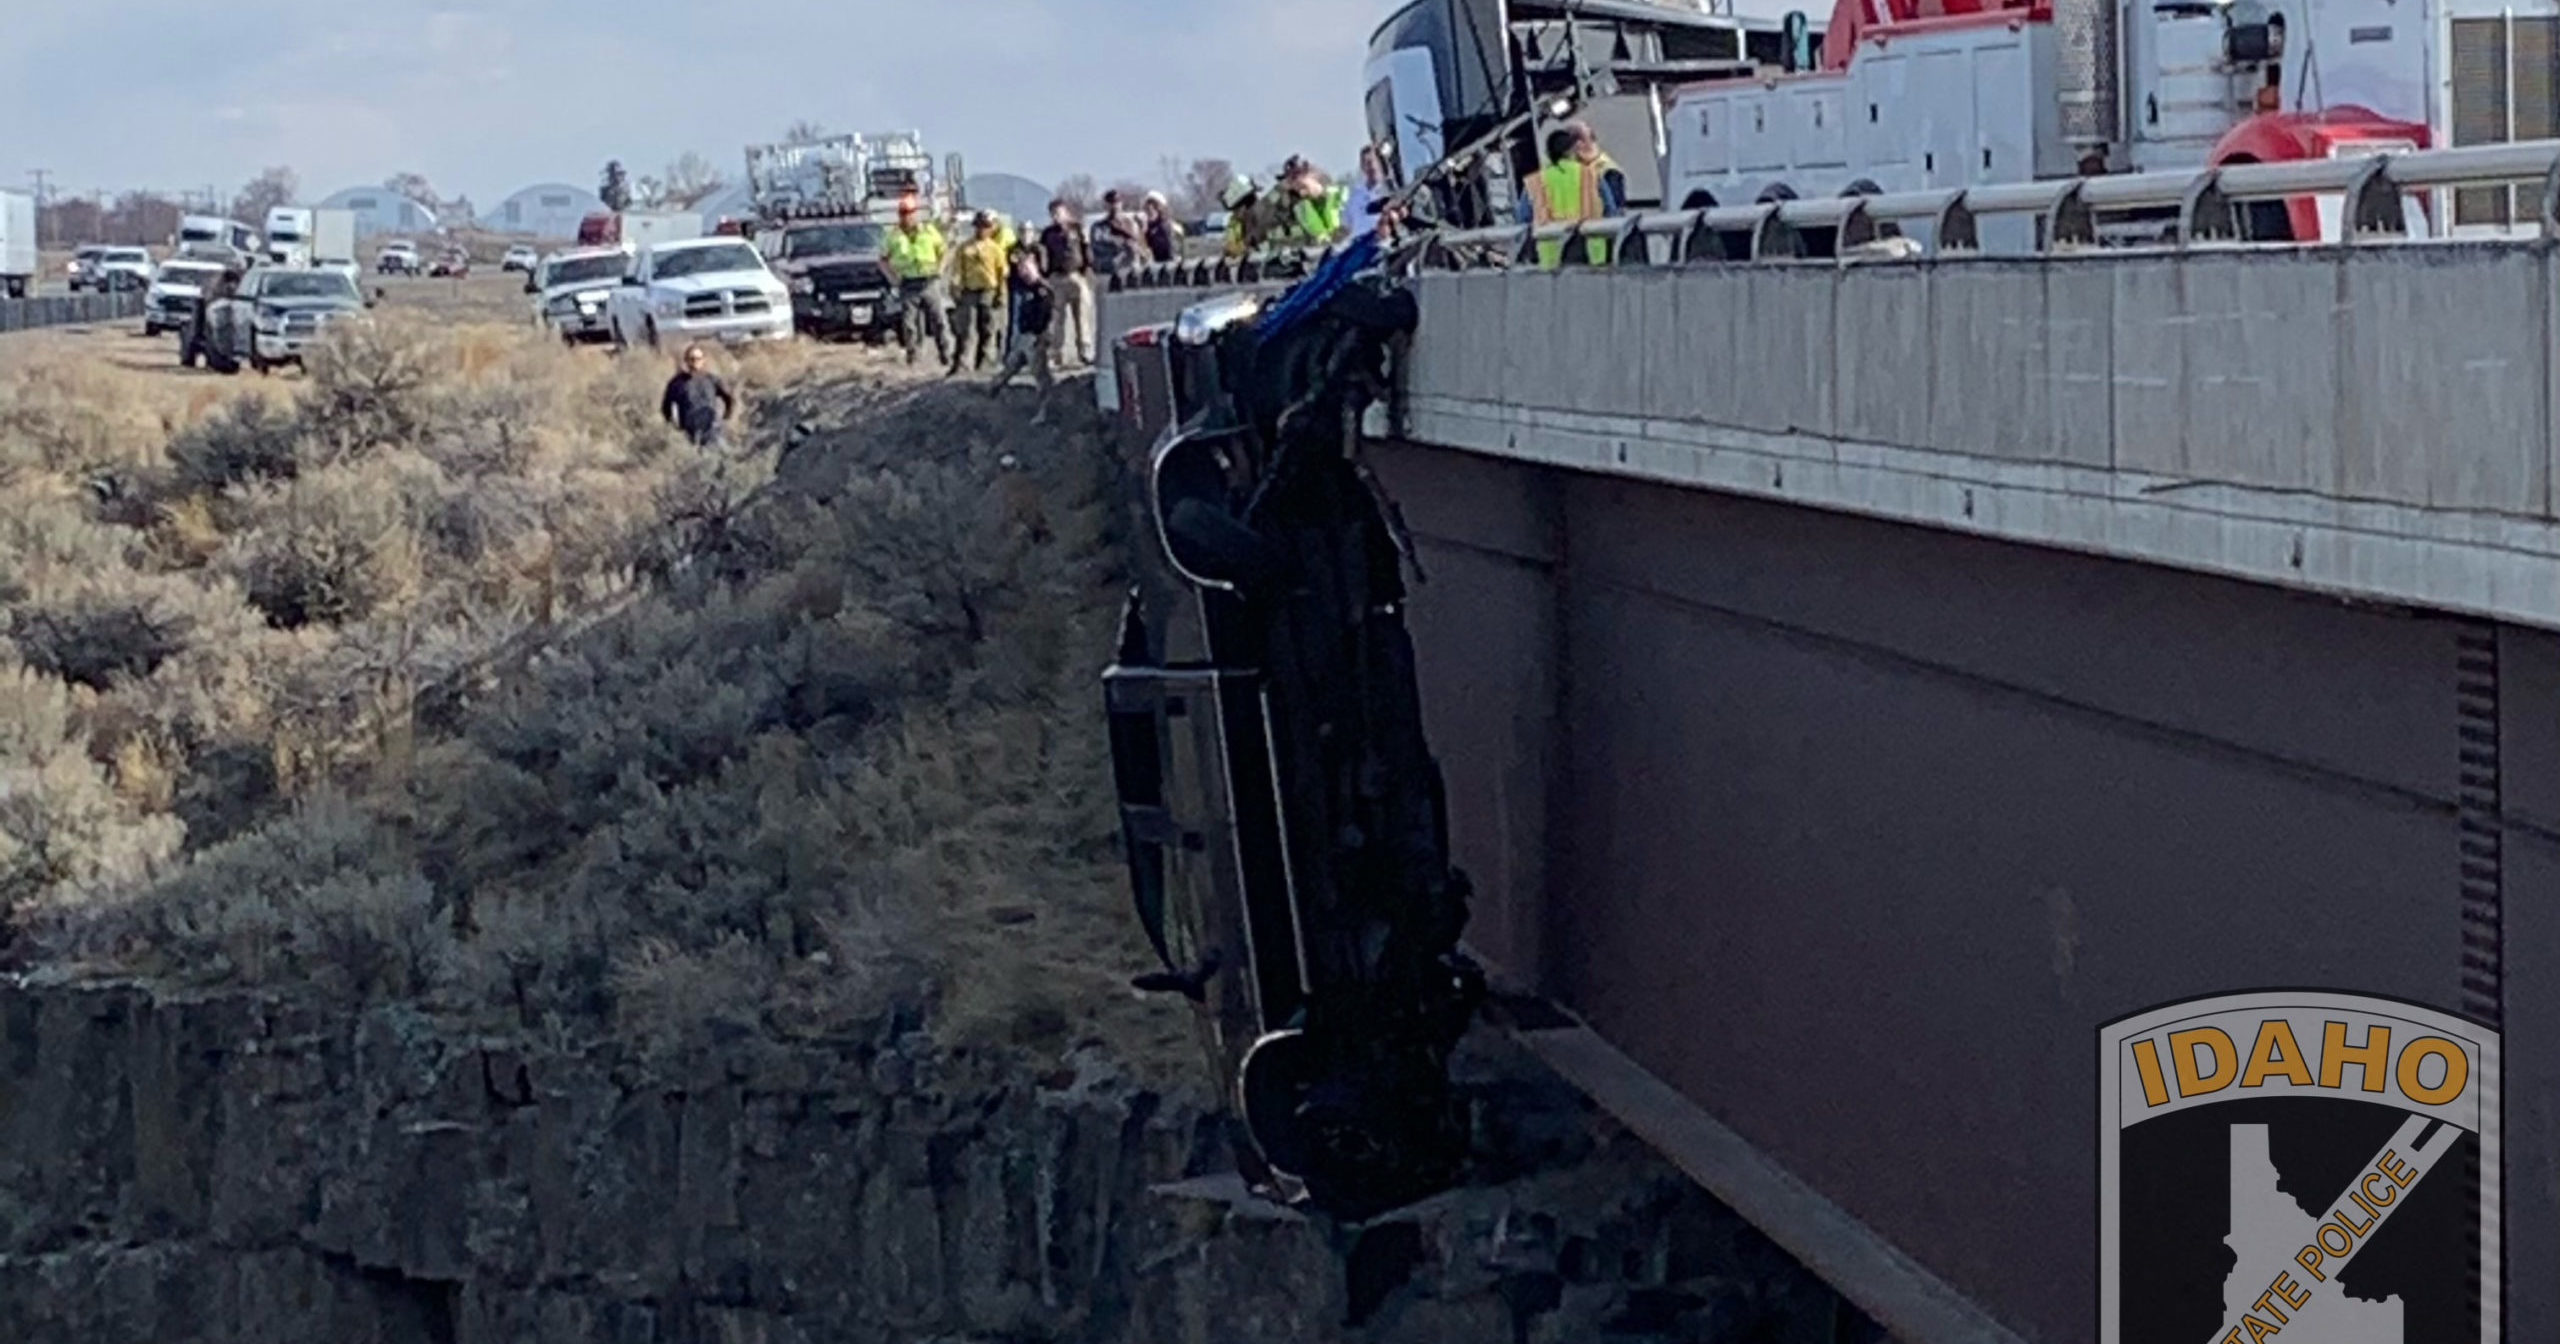 A pickup truck dangles above a deep gorge after plunging off a bridge in southern Idaho on March 15, 2021.